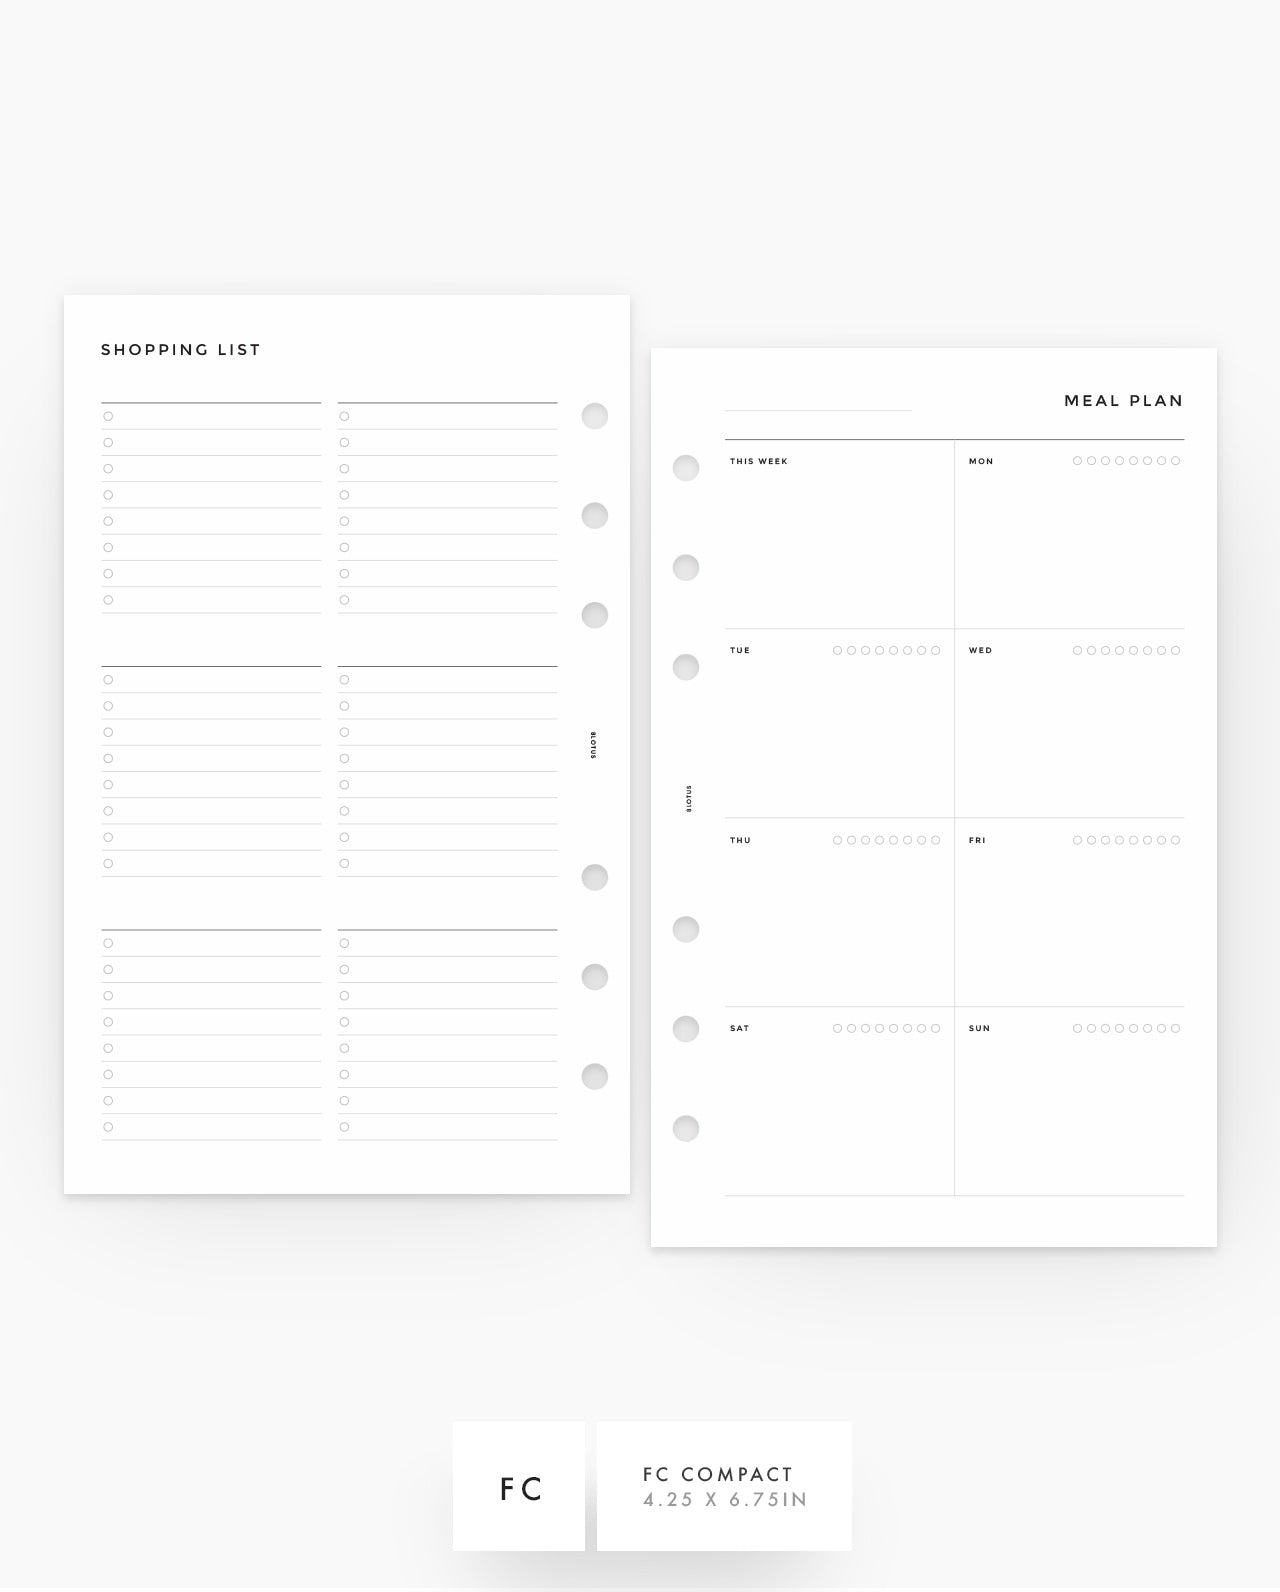 MN037 - Weekly Meal Planner - Shopping List  - PDF